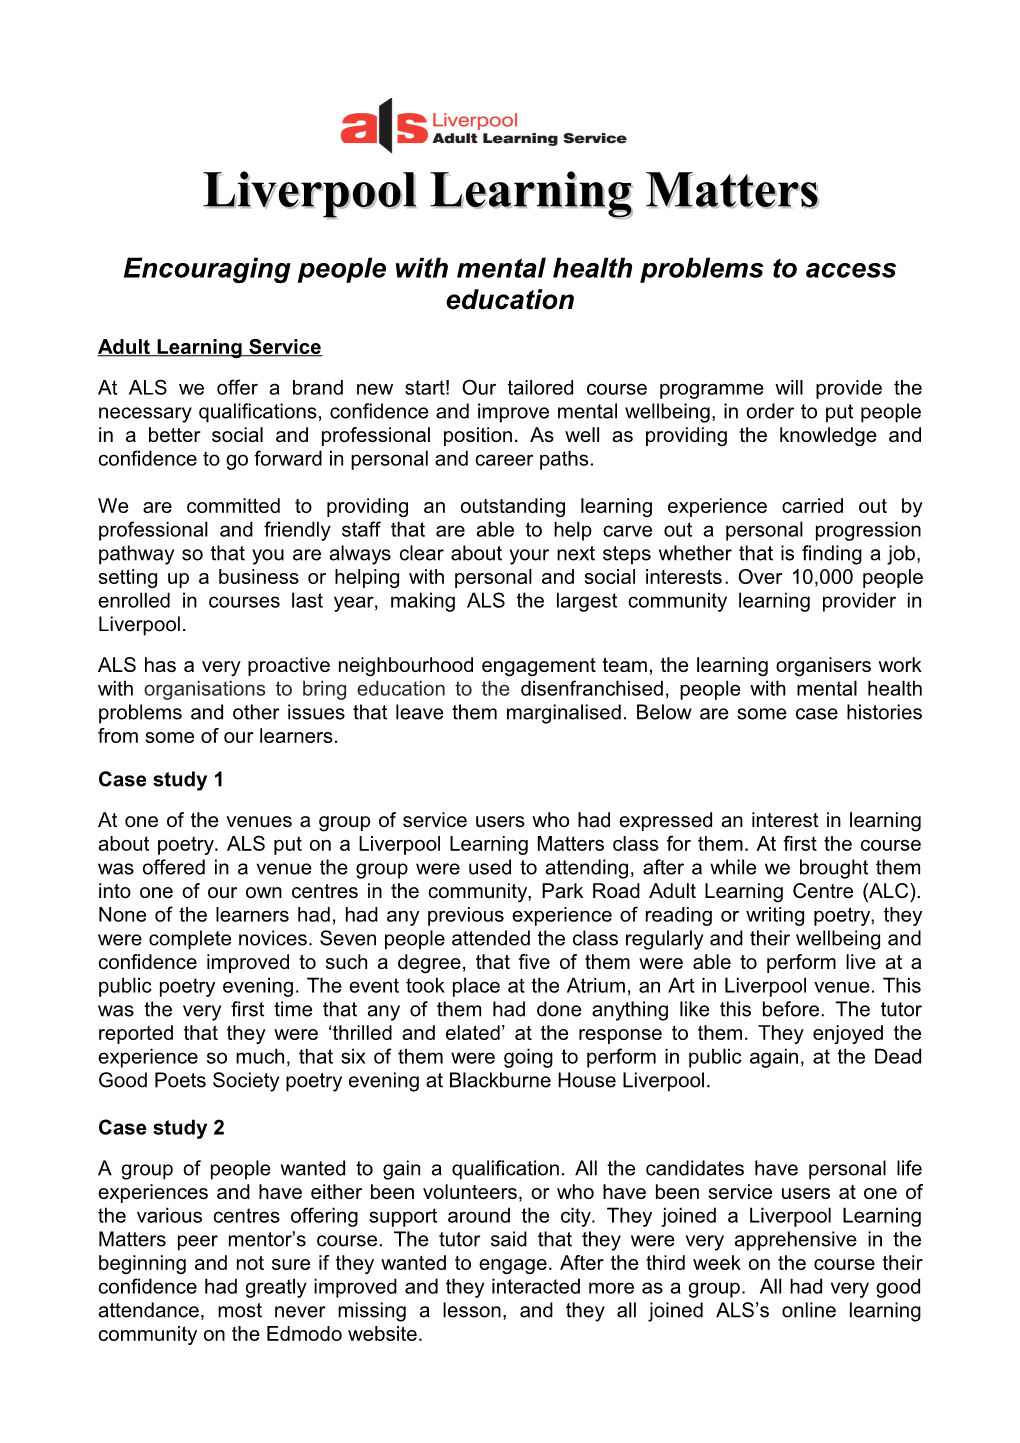 Encouraging People with Mental Health Problems to Access Education